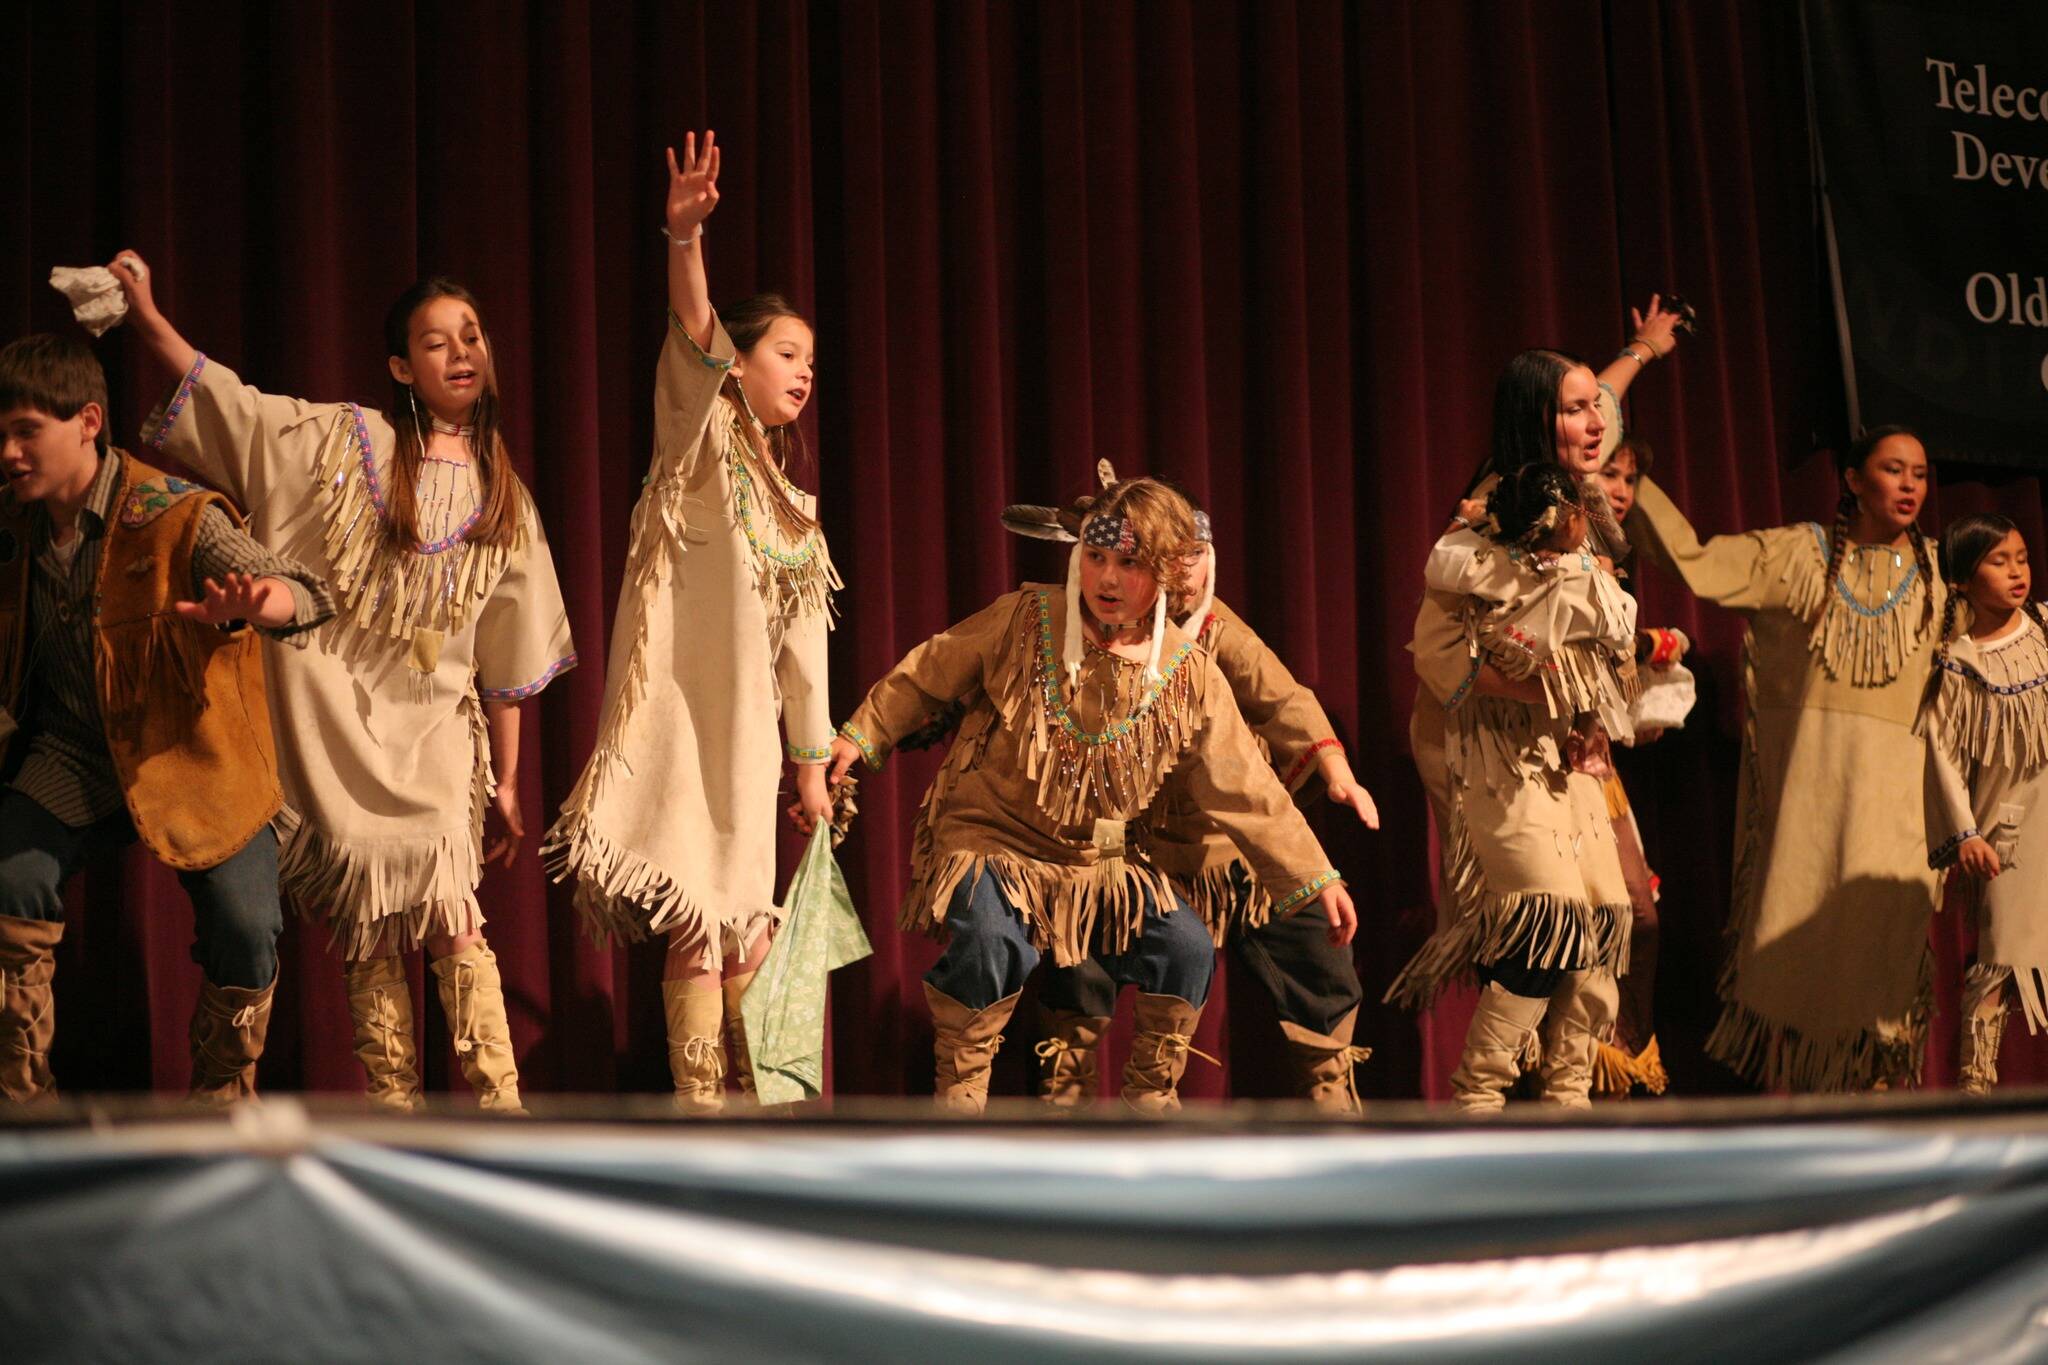 Youths perform during the 2019 Alaska Federation of Natives convention in Fairbanks. The convention, which AFN says is the largest representative annual gathering in the United States of Native peoples, is meeting in-person for the first time in two years from Oct. 20-22 in Anchorage. (Alaska Federation of Natives)